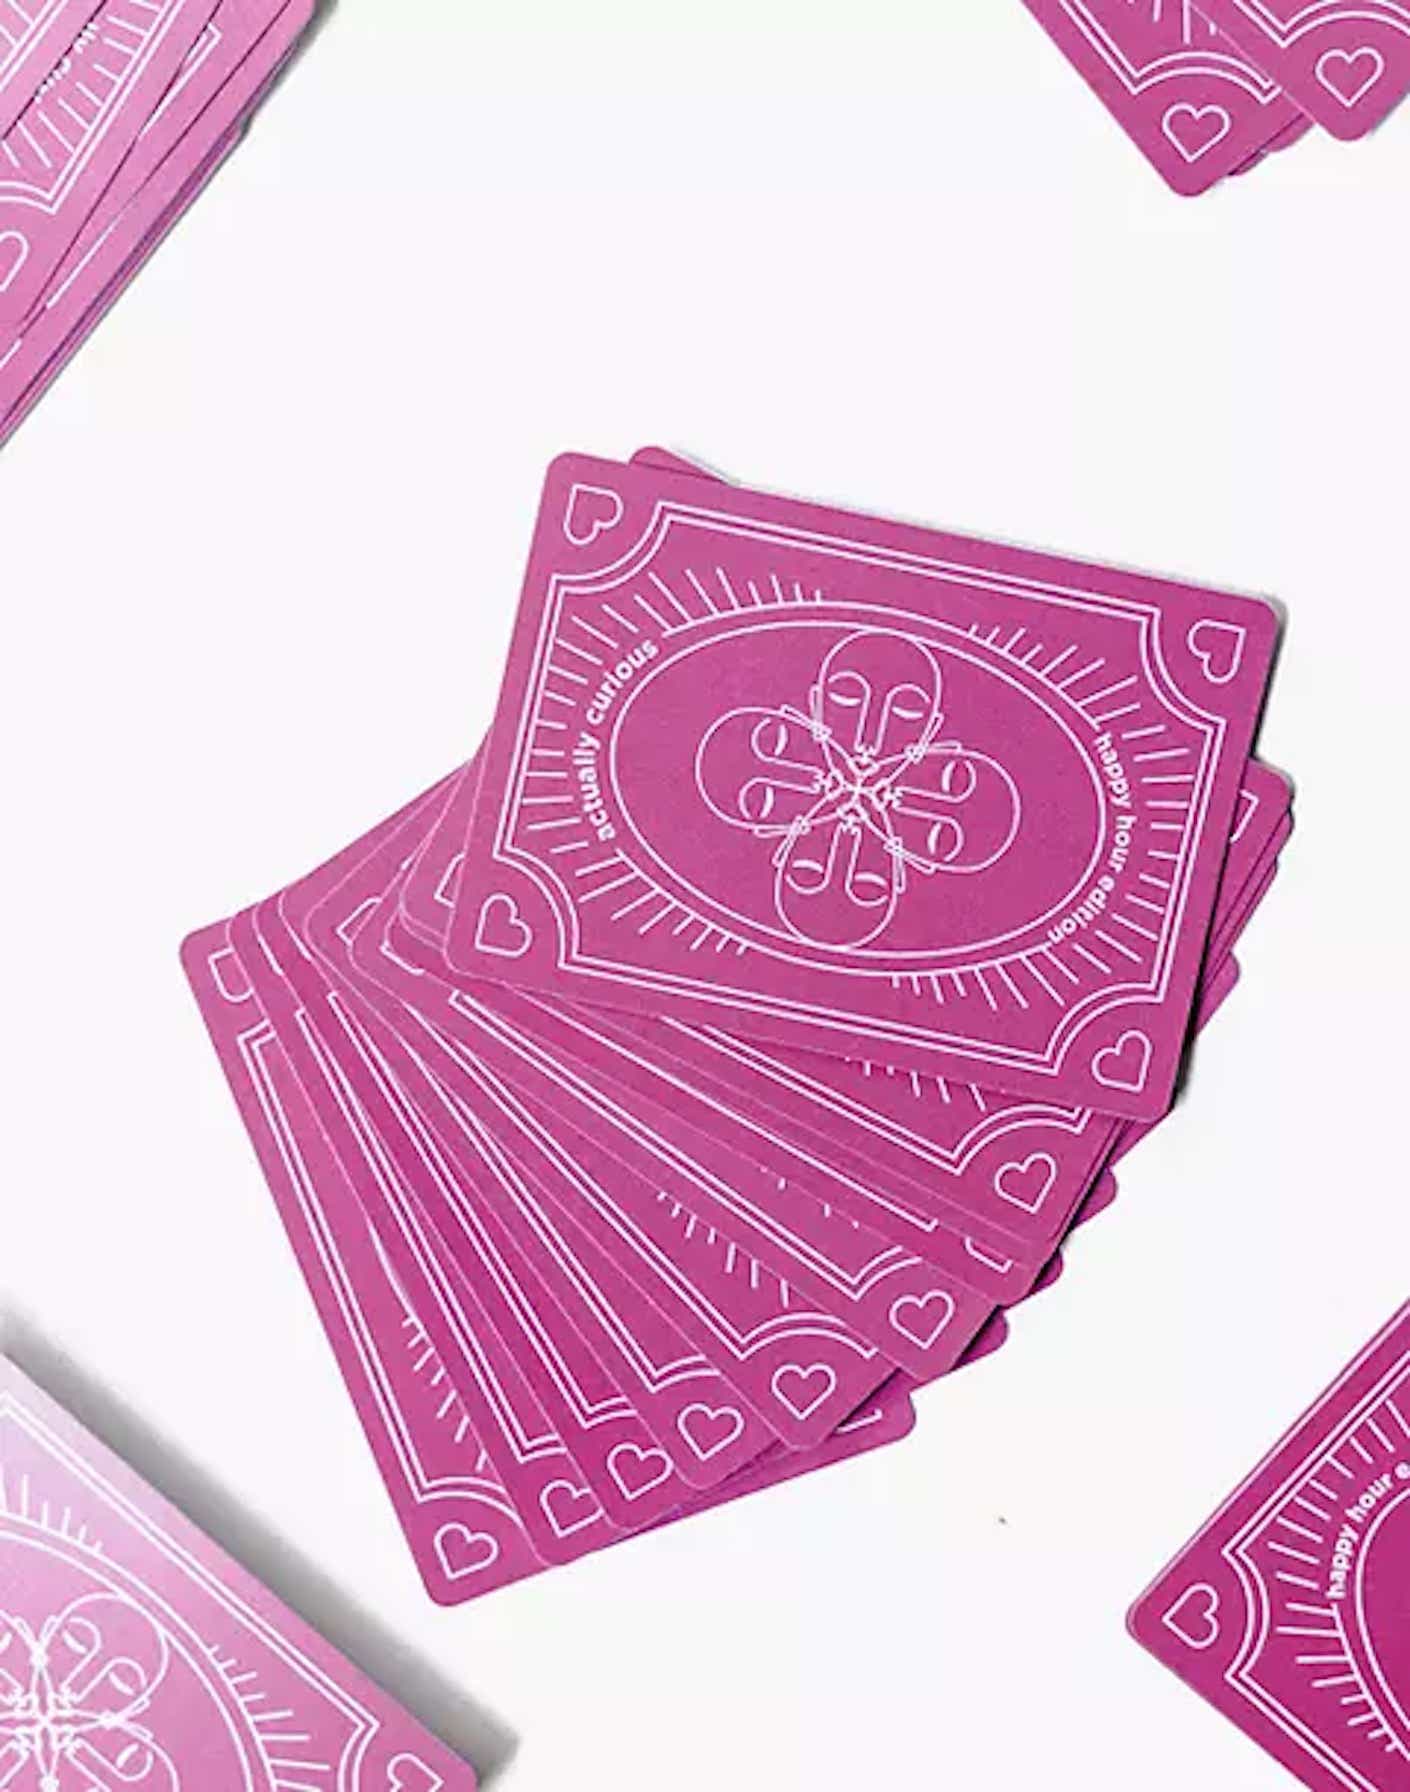 A deck of pink cards with white patterned details are spread out onto a white table.